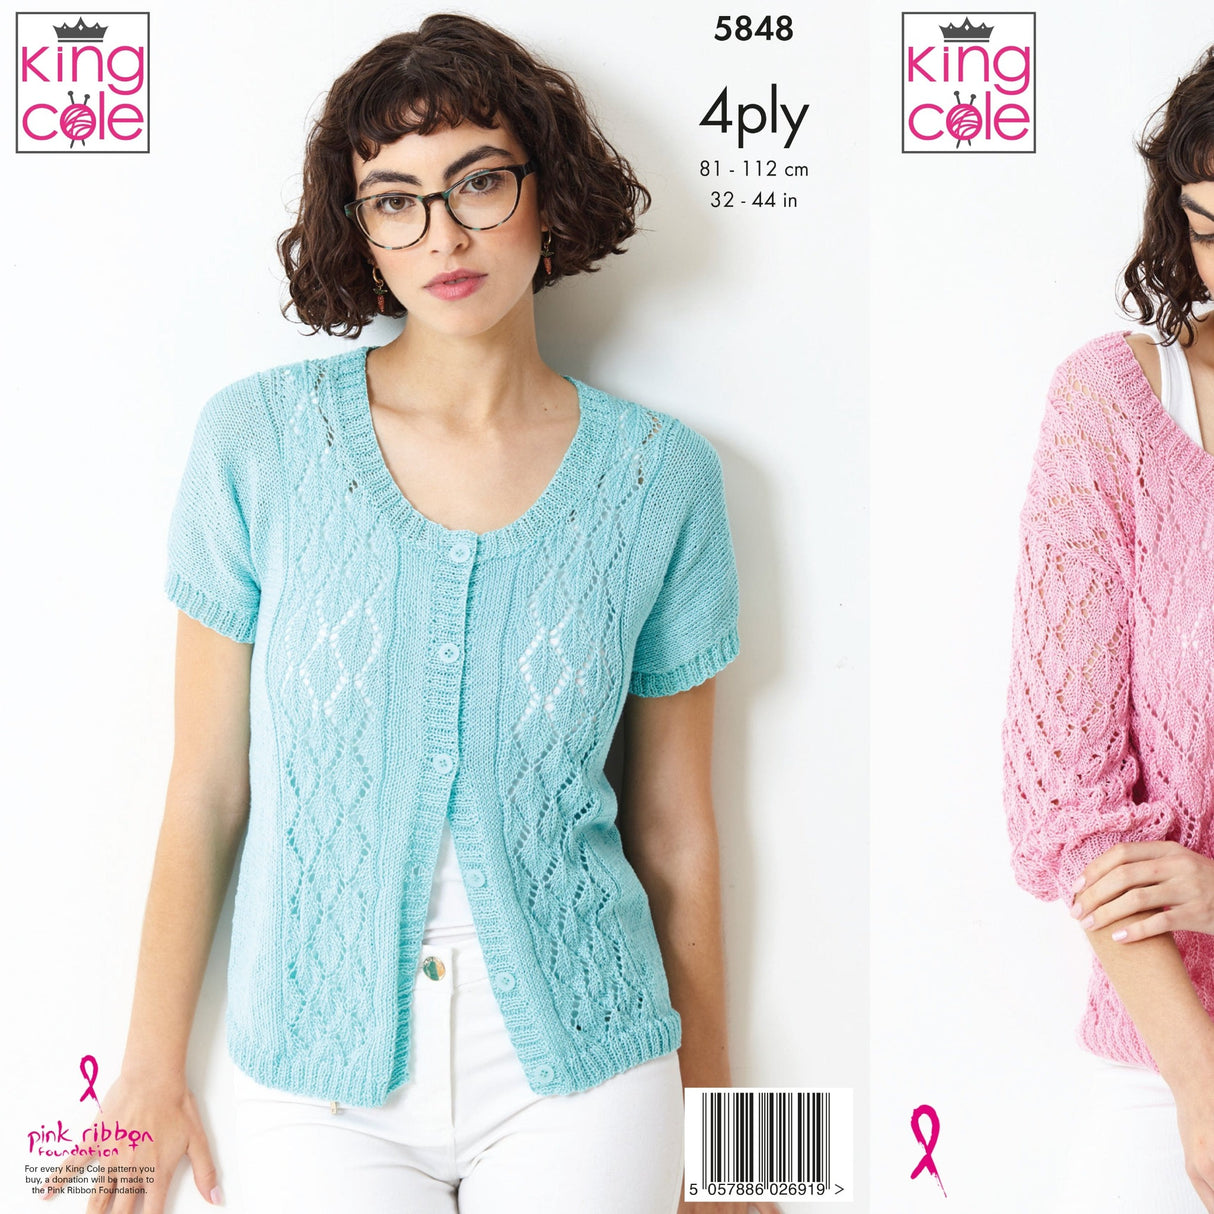 King Cole Patterns King Cole Ladies 4 Ply Knitting Pattern 5848